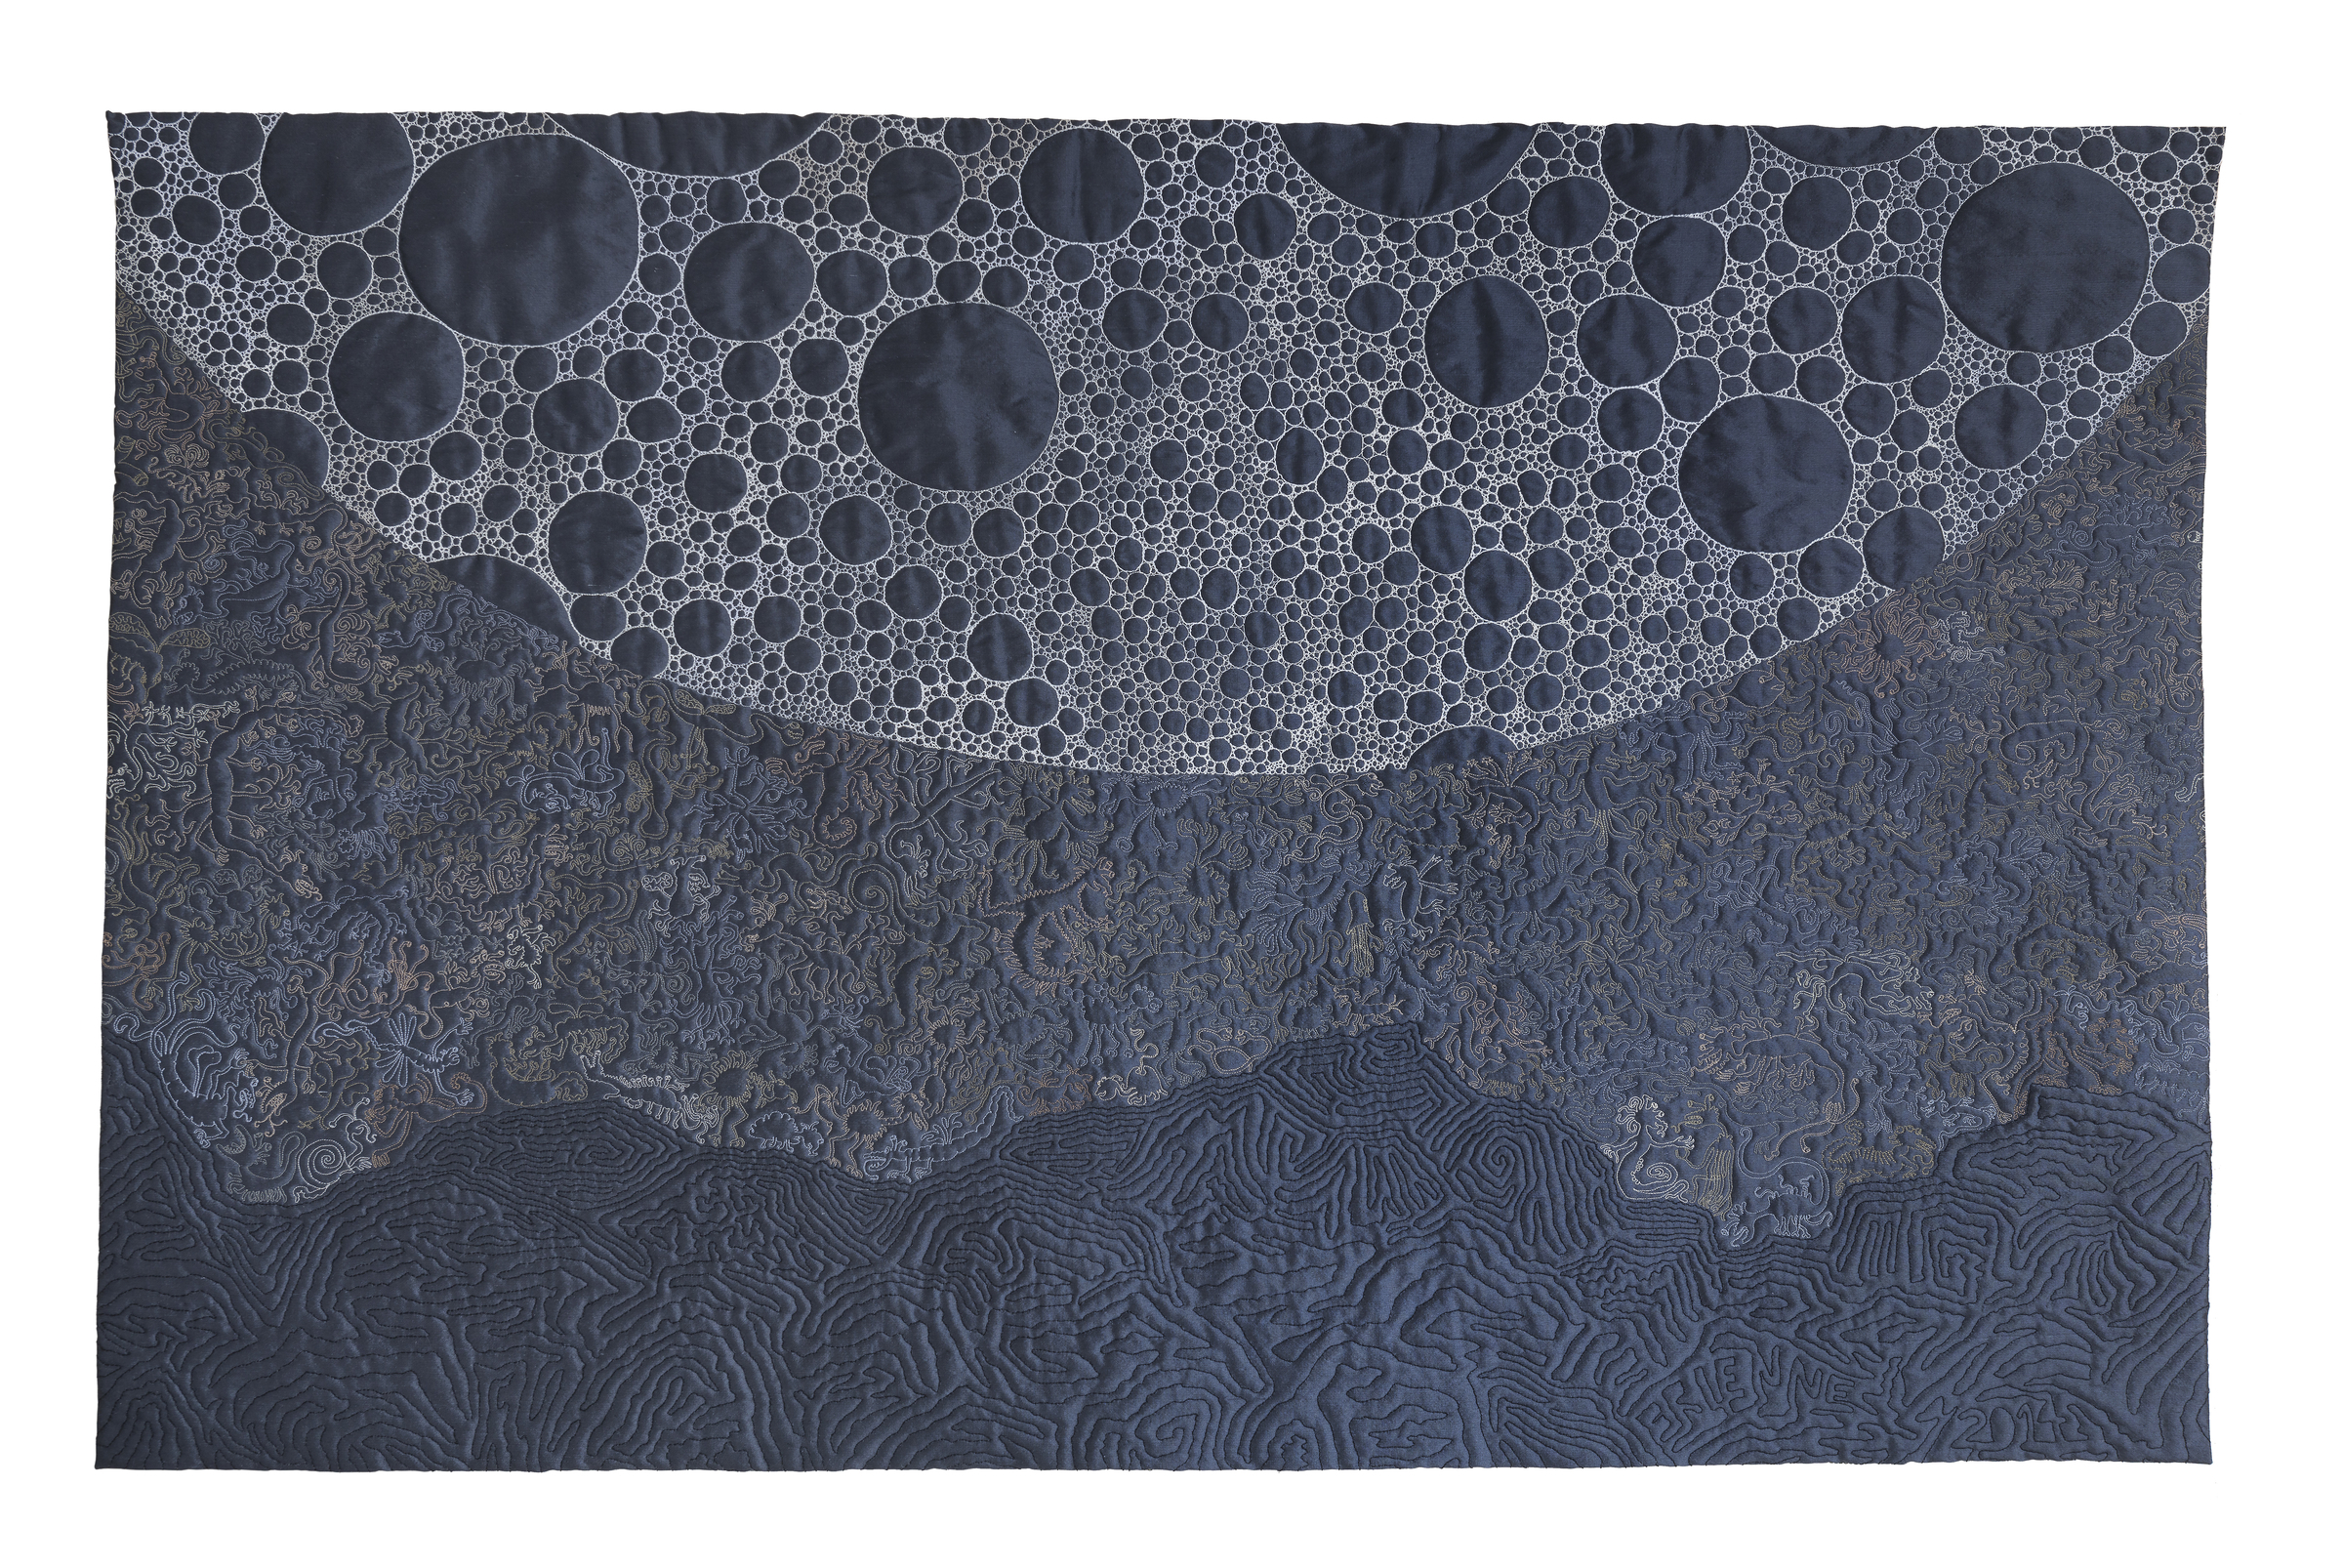 moonrise study, 40x25 machine quilted wall hanging by brienne brown